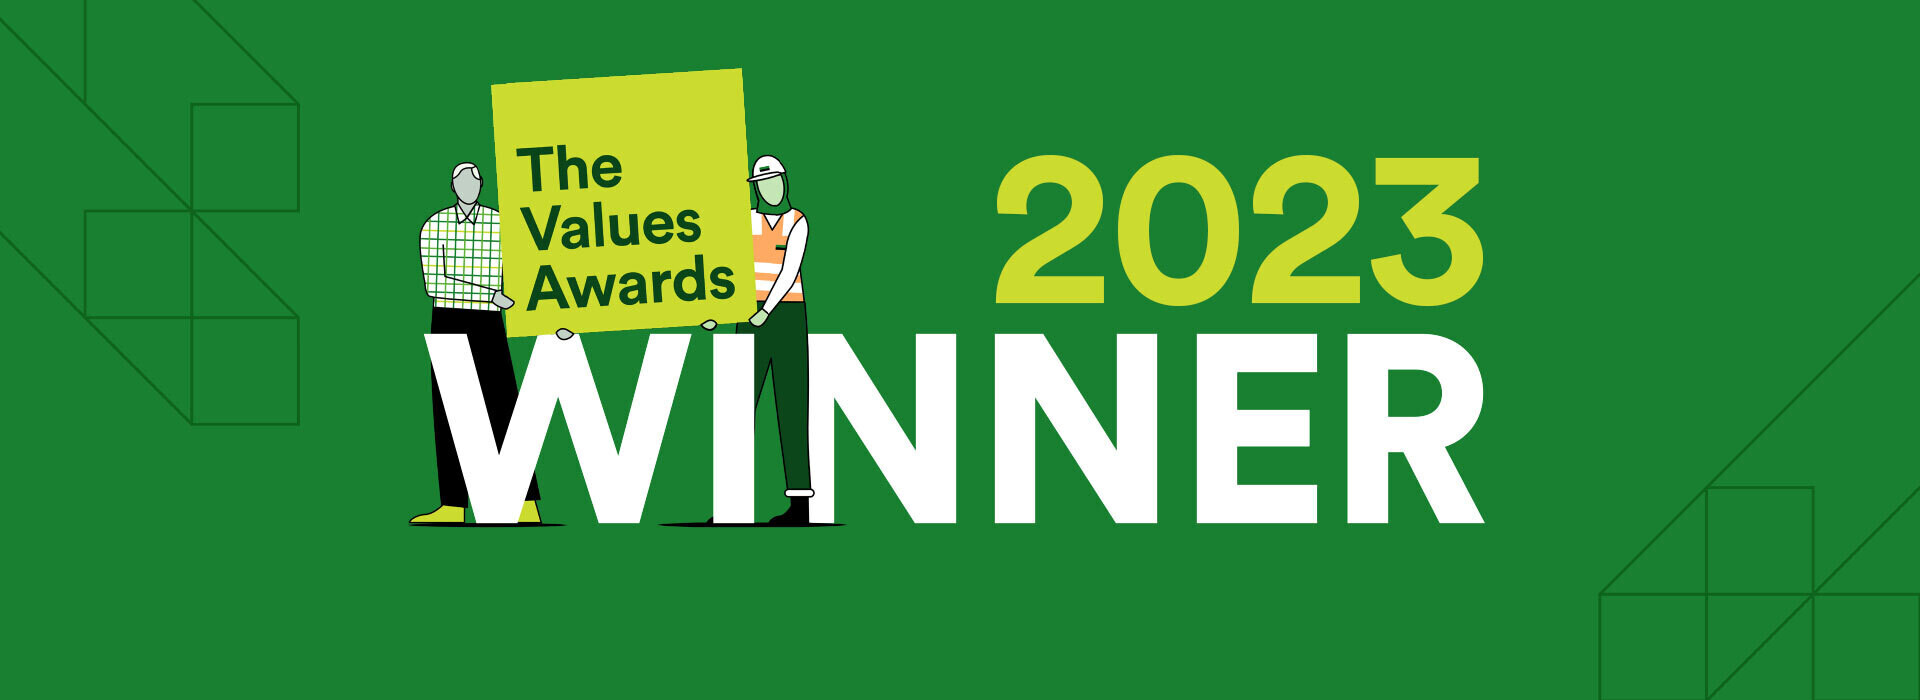 The winner of the McConnell Dowell Group Values Award for 2023 is...